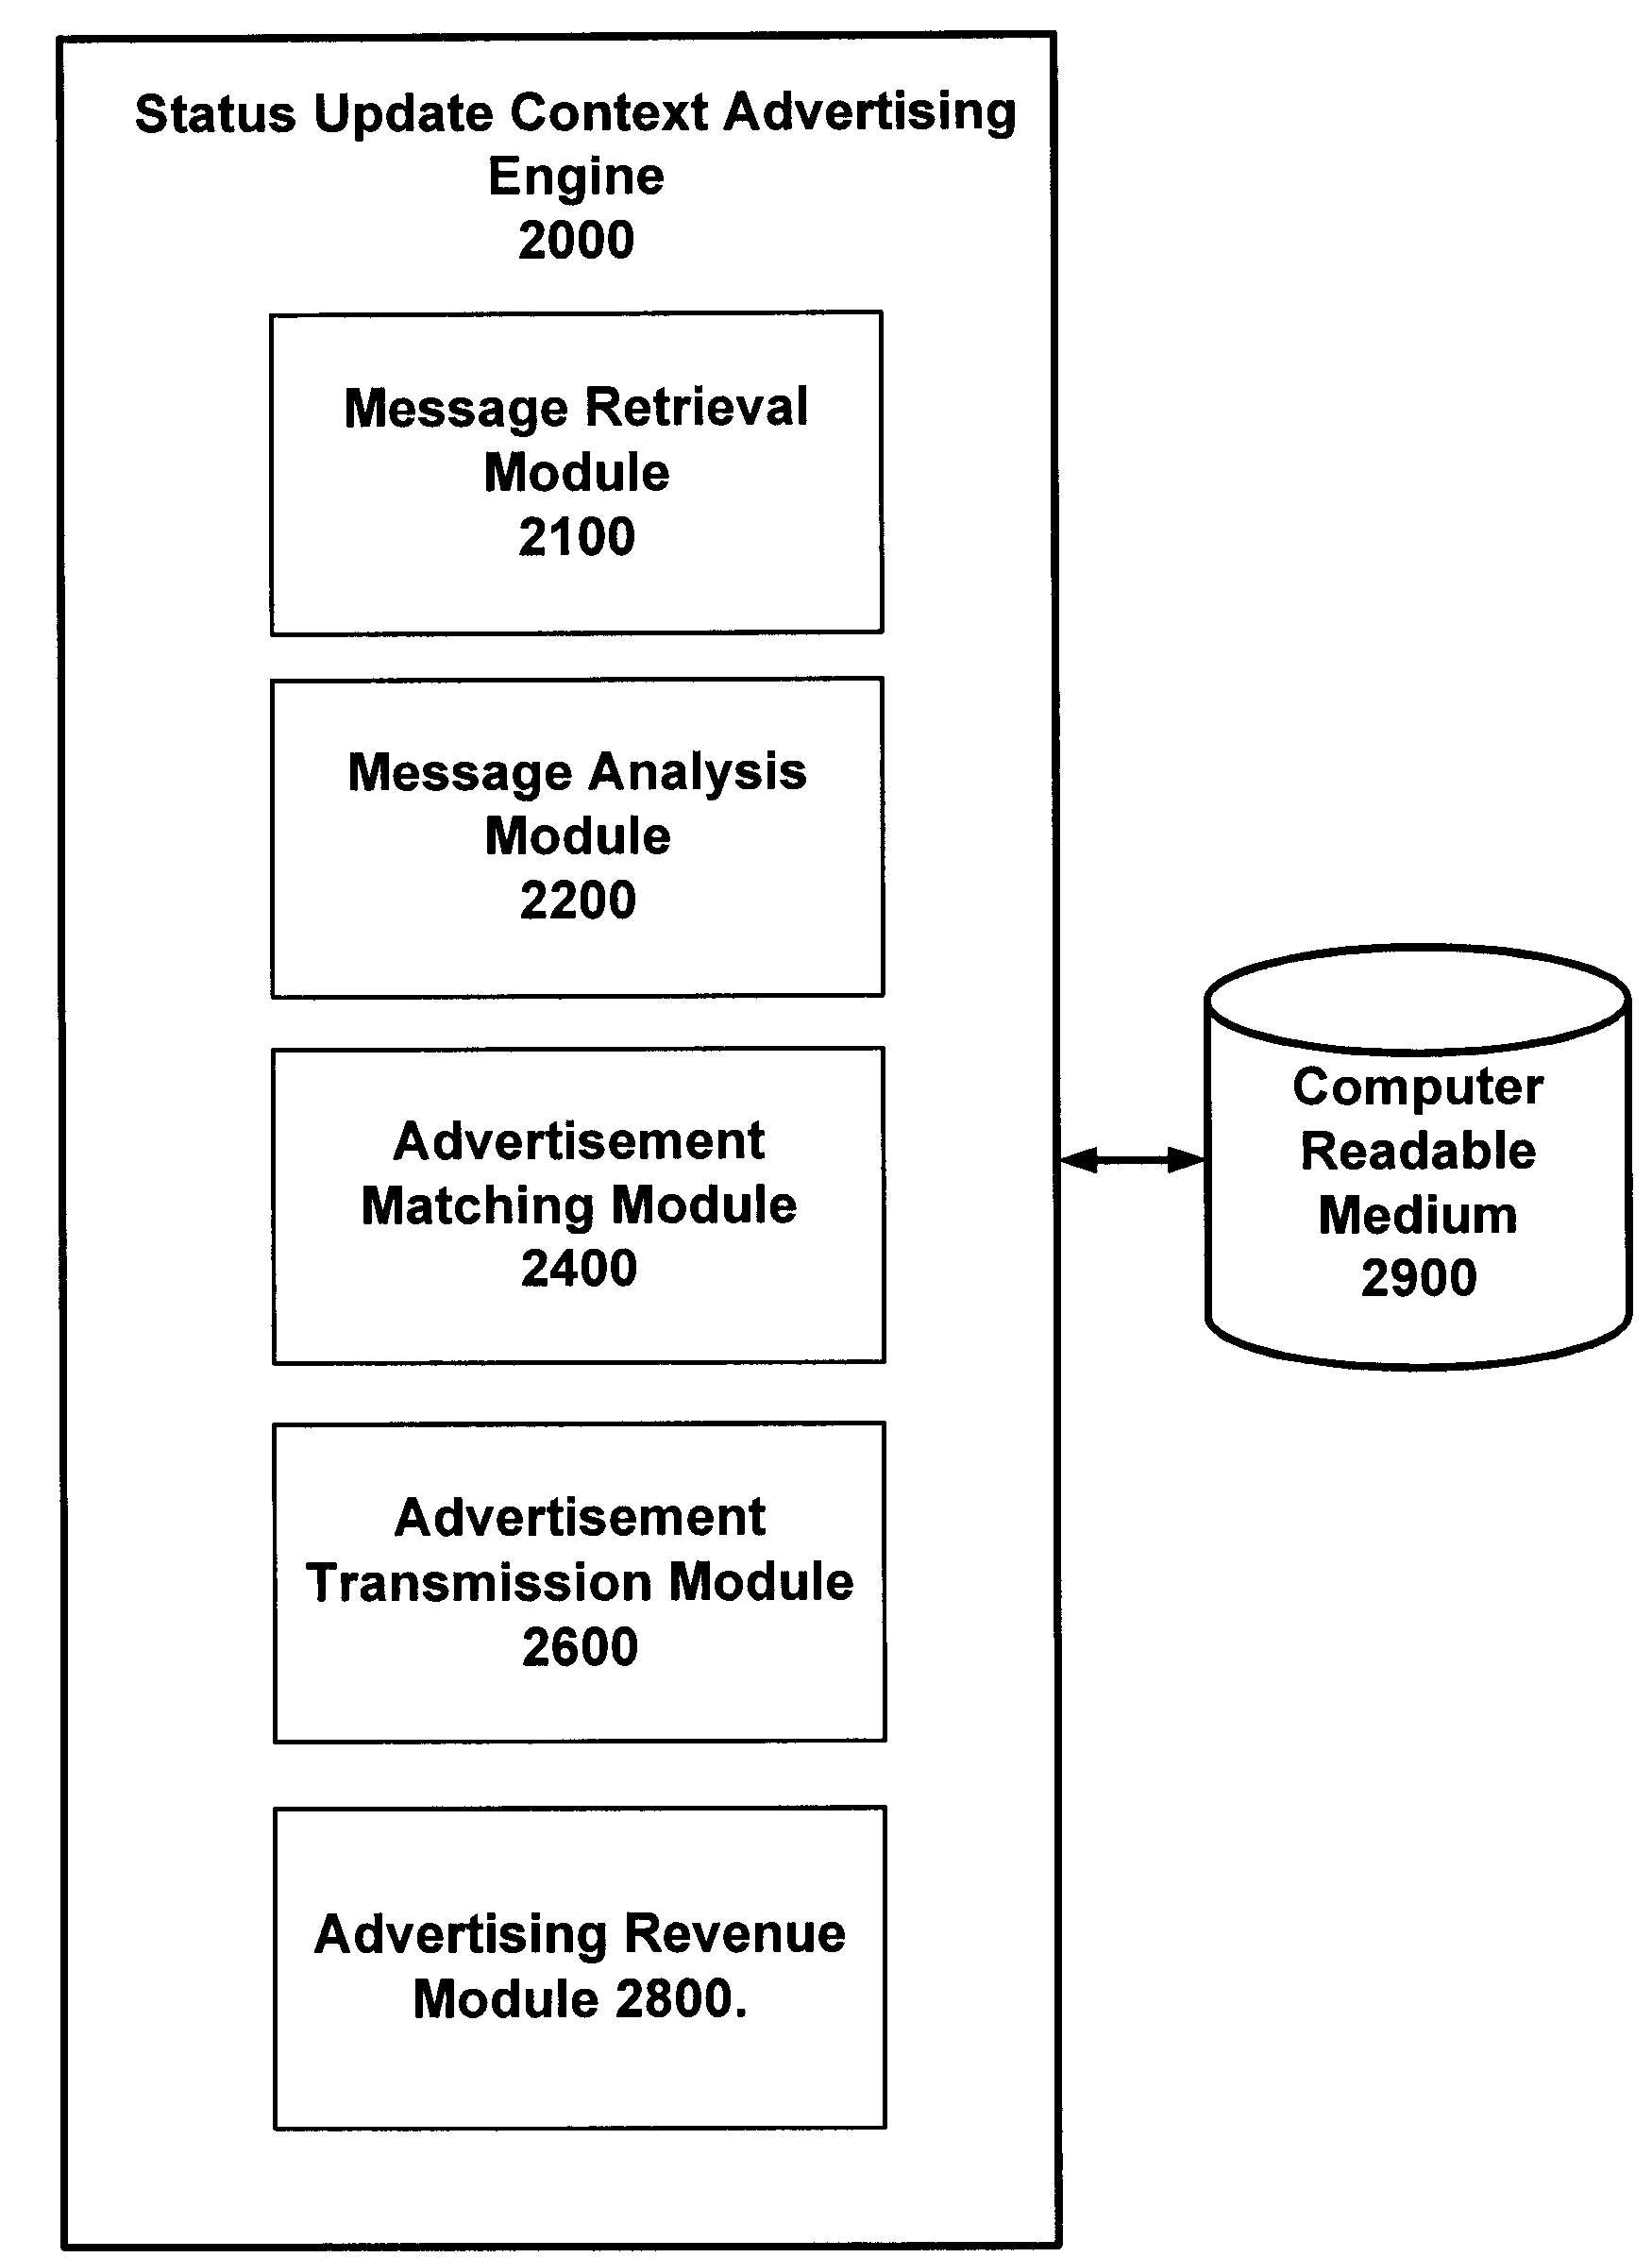 System and method for contextual advertising based on status messages